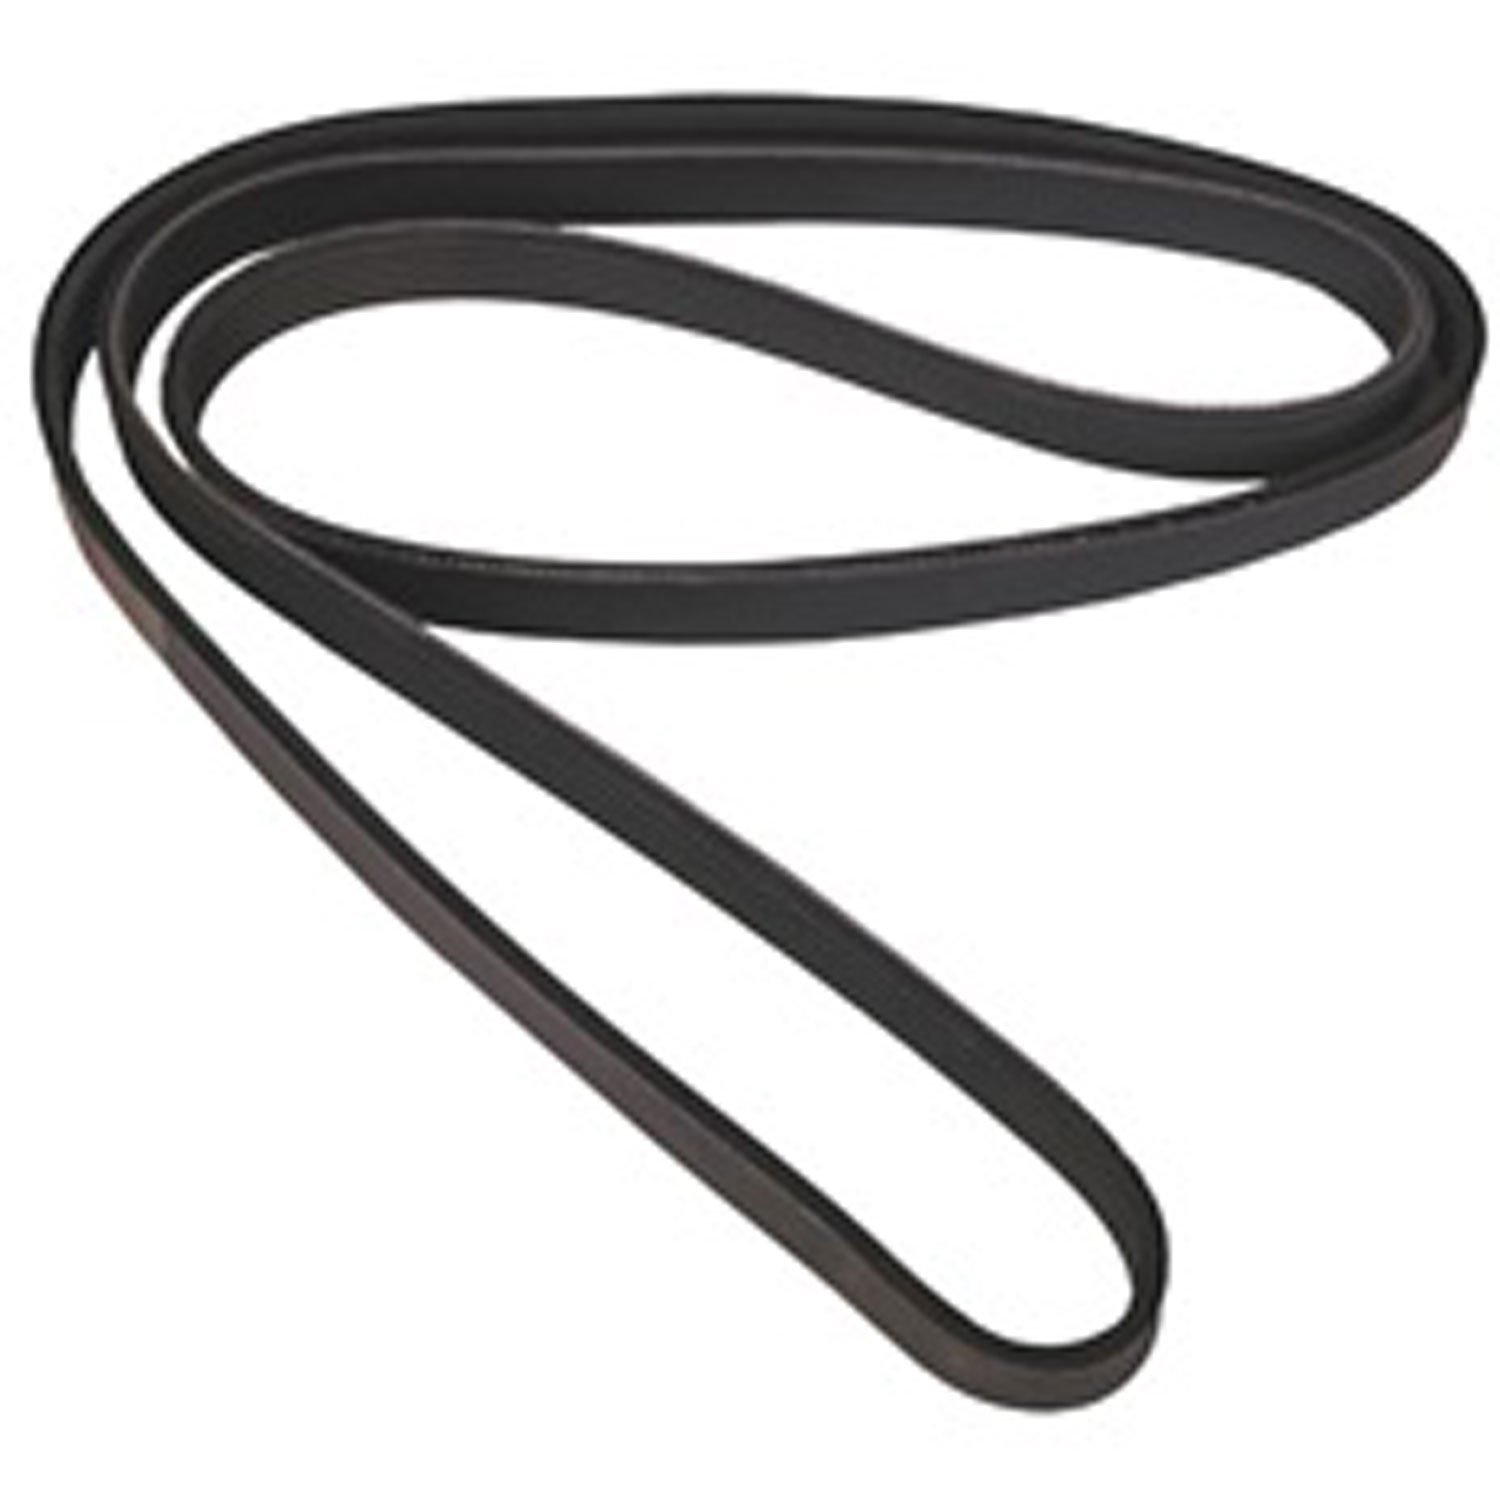 Stock replacement serpentine belt from Omix-ADA, Fits 1995 Jeep Wrangler YJ with 2.5 liter e